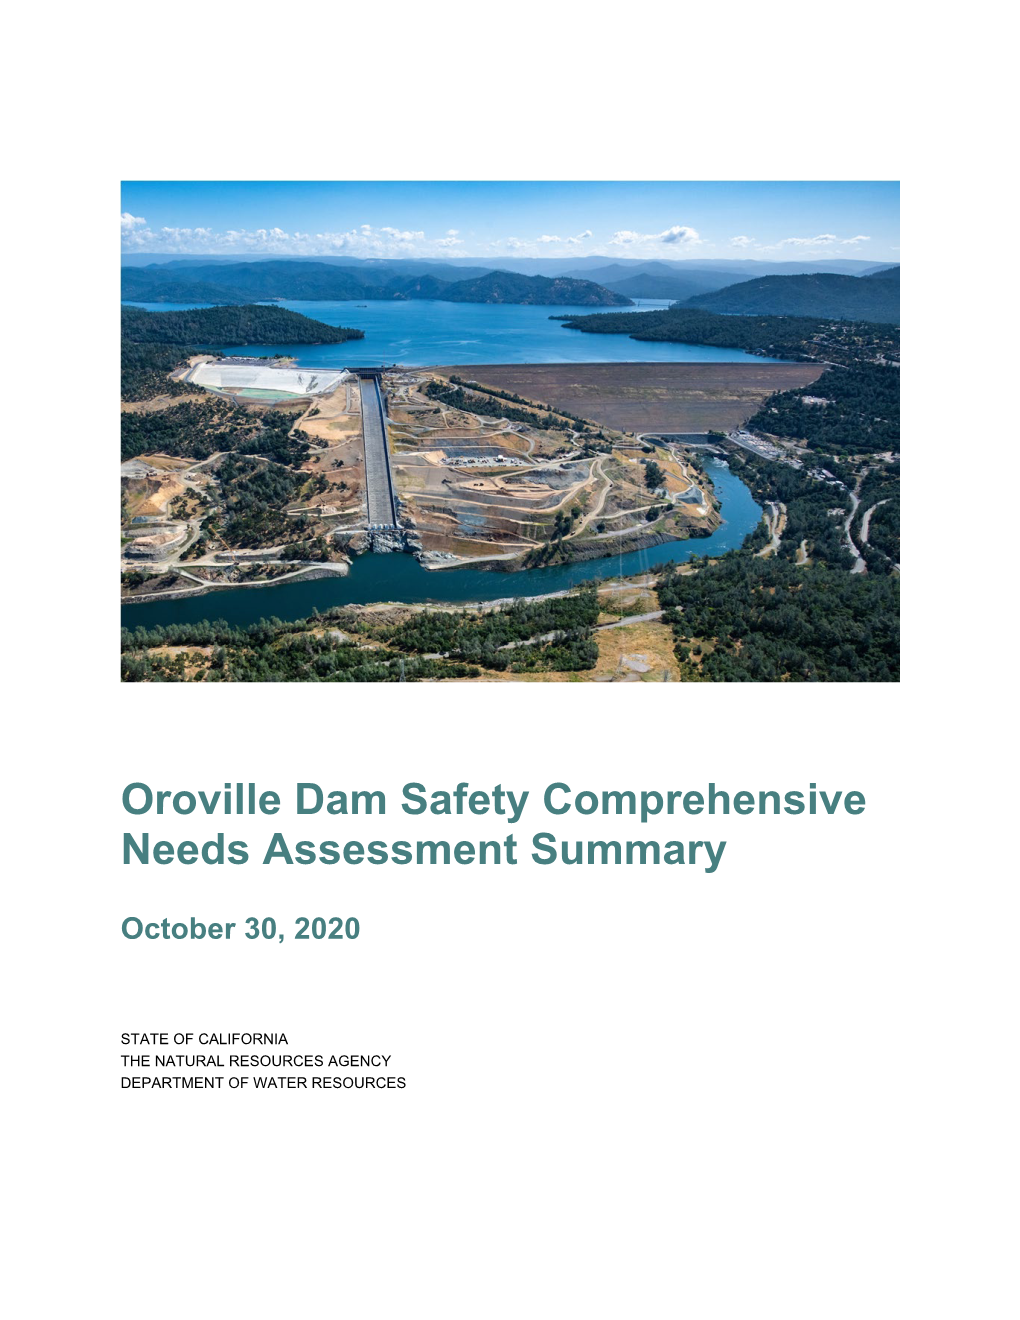 Oroville Dam Safety Comprehensive Needs Assessment Summary